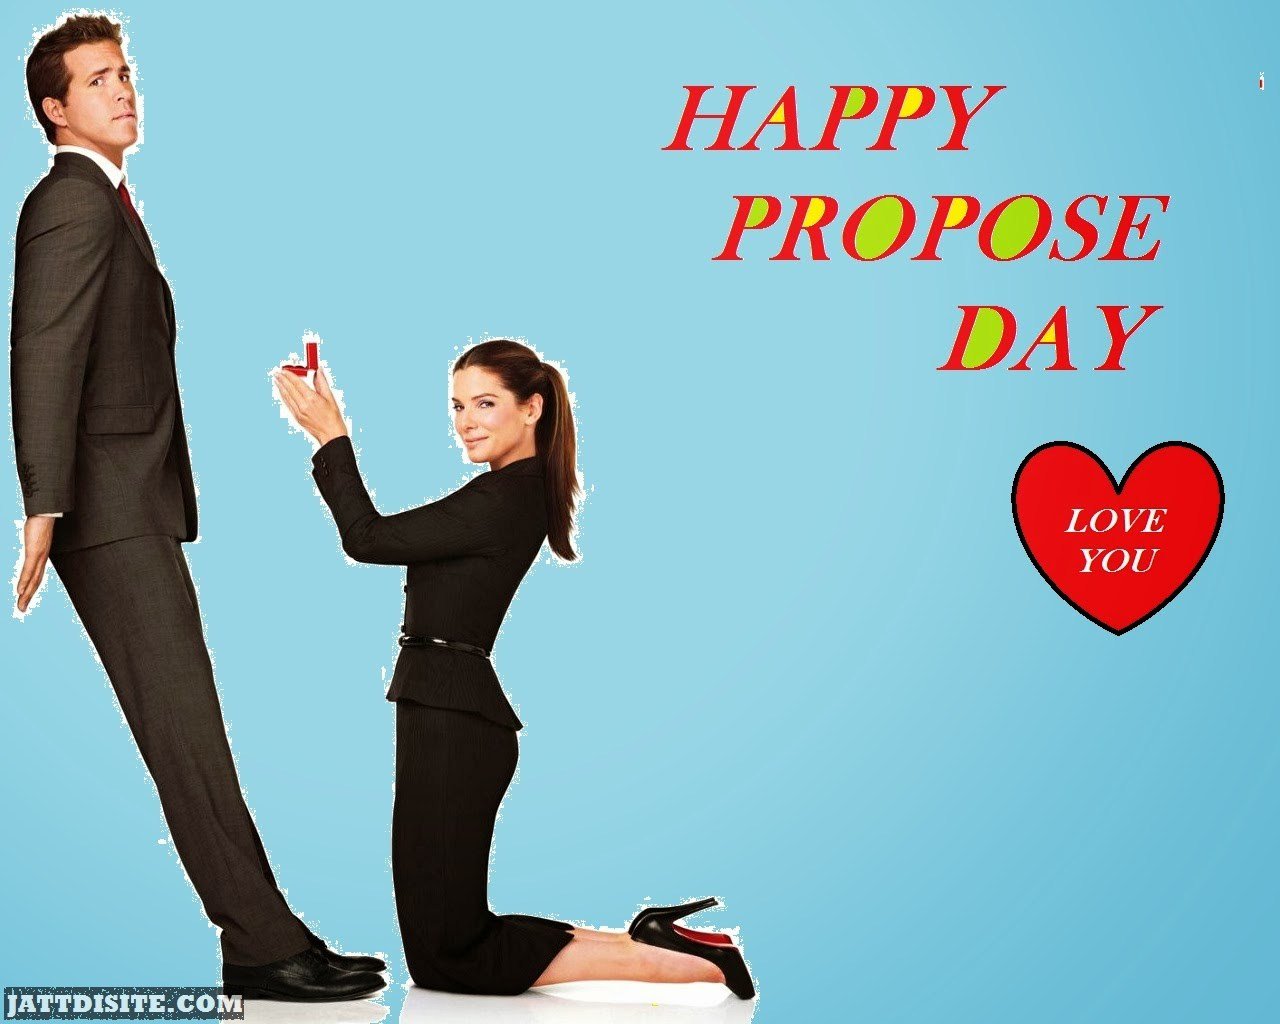 Propose Day Pictures, Images - Page 2